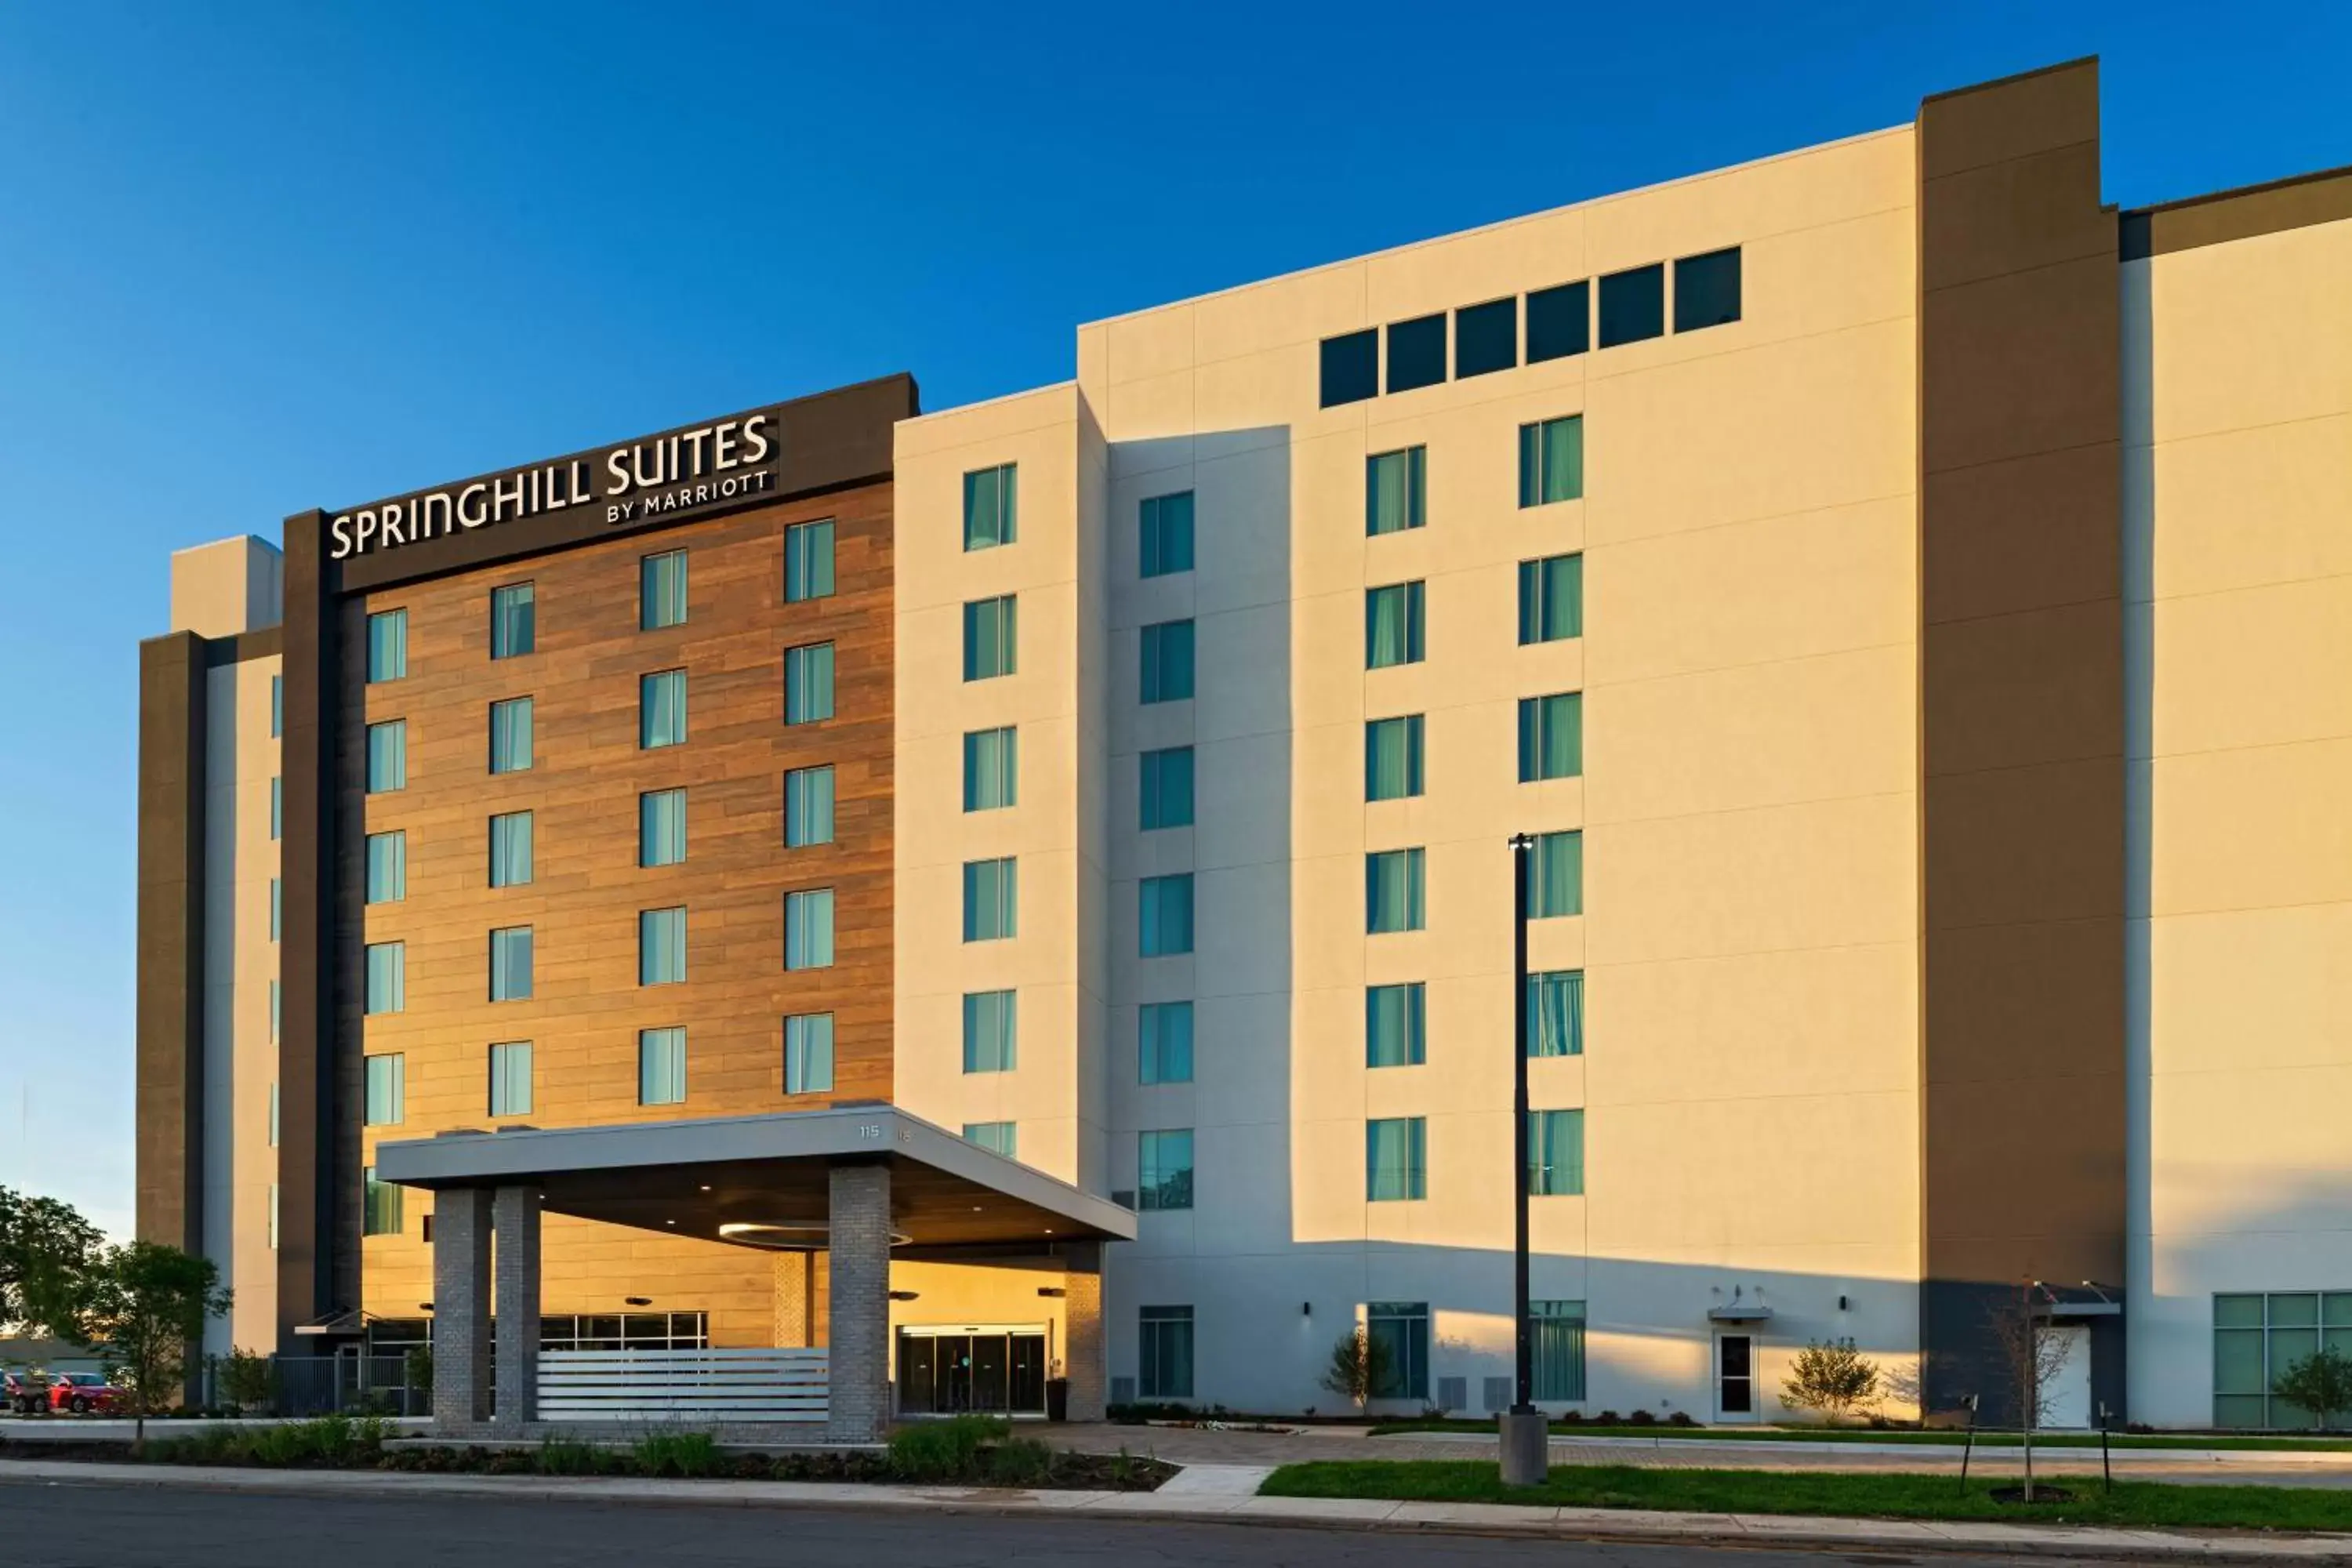 Property Building in SpringHill Suites Waco